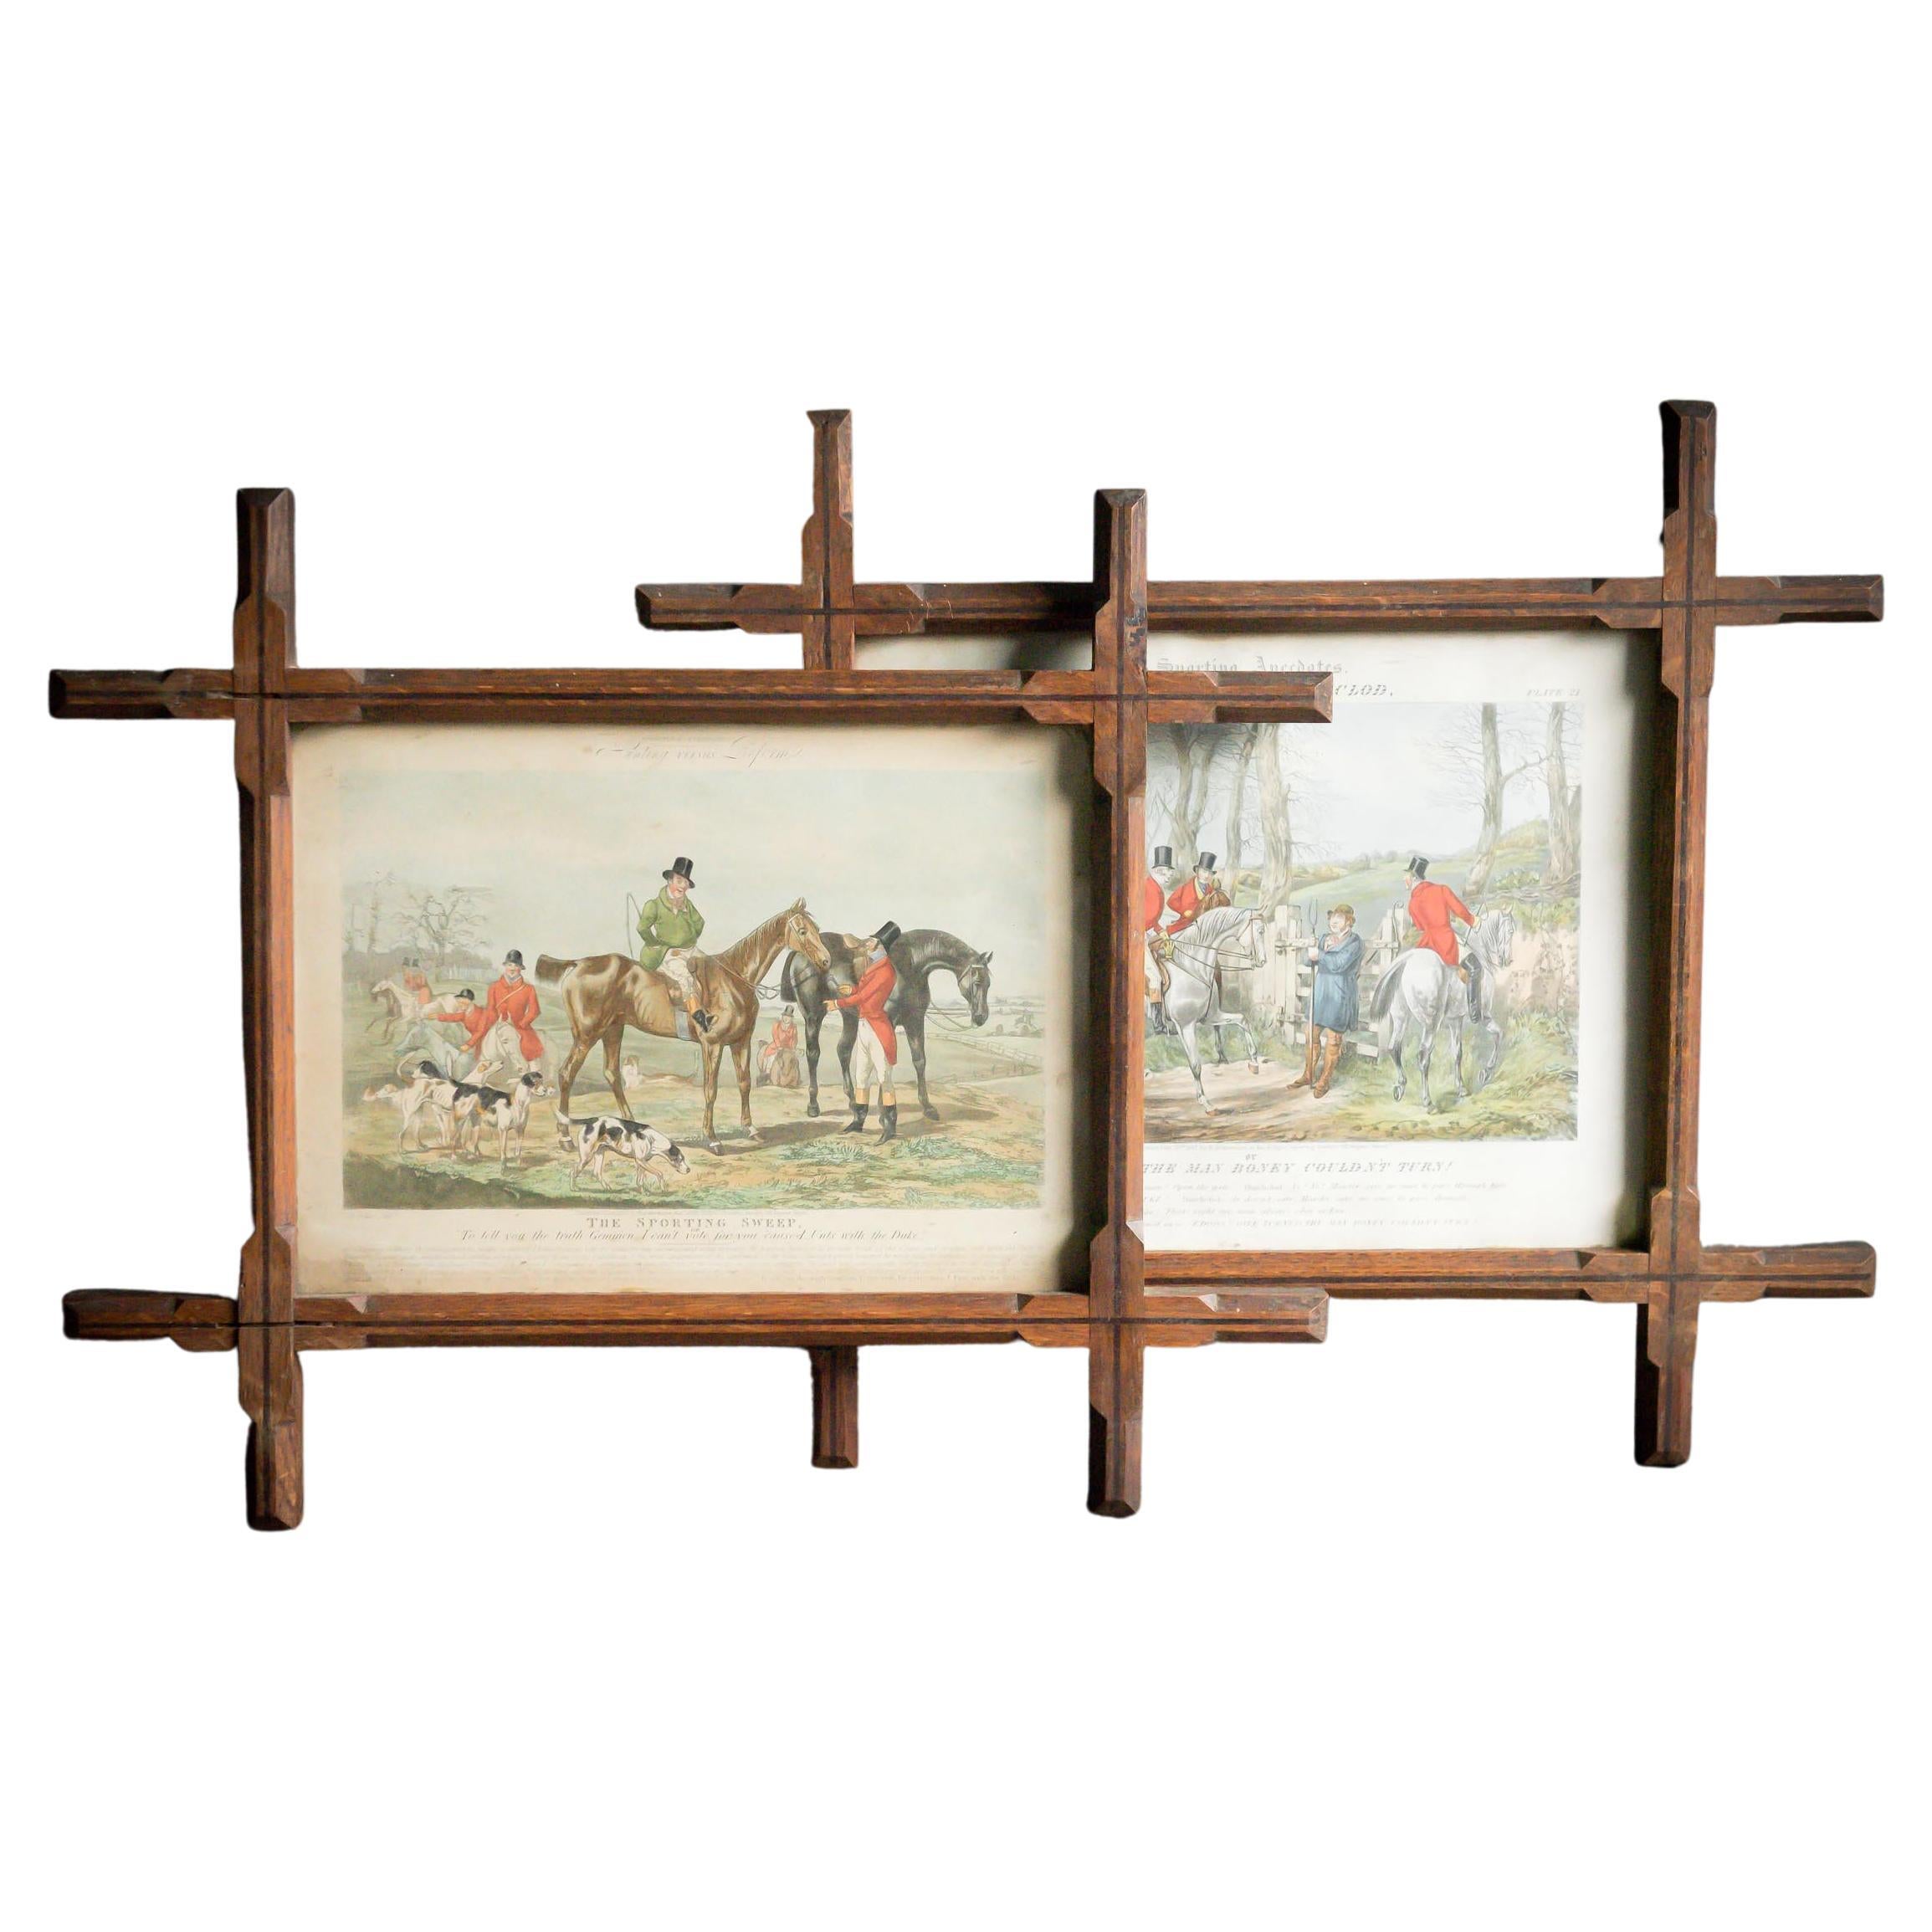 Duo of Inlaid Crossover Frames with Hunting Prints